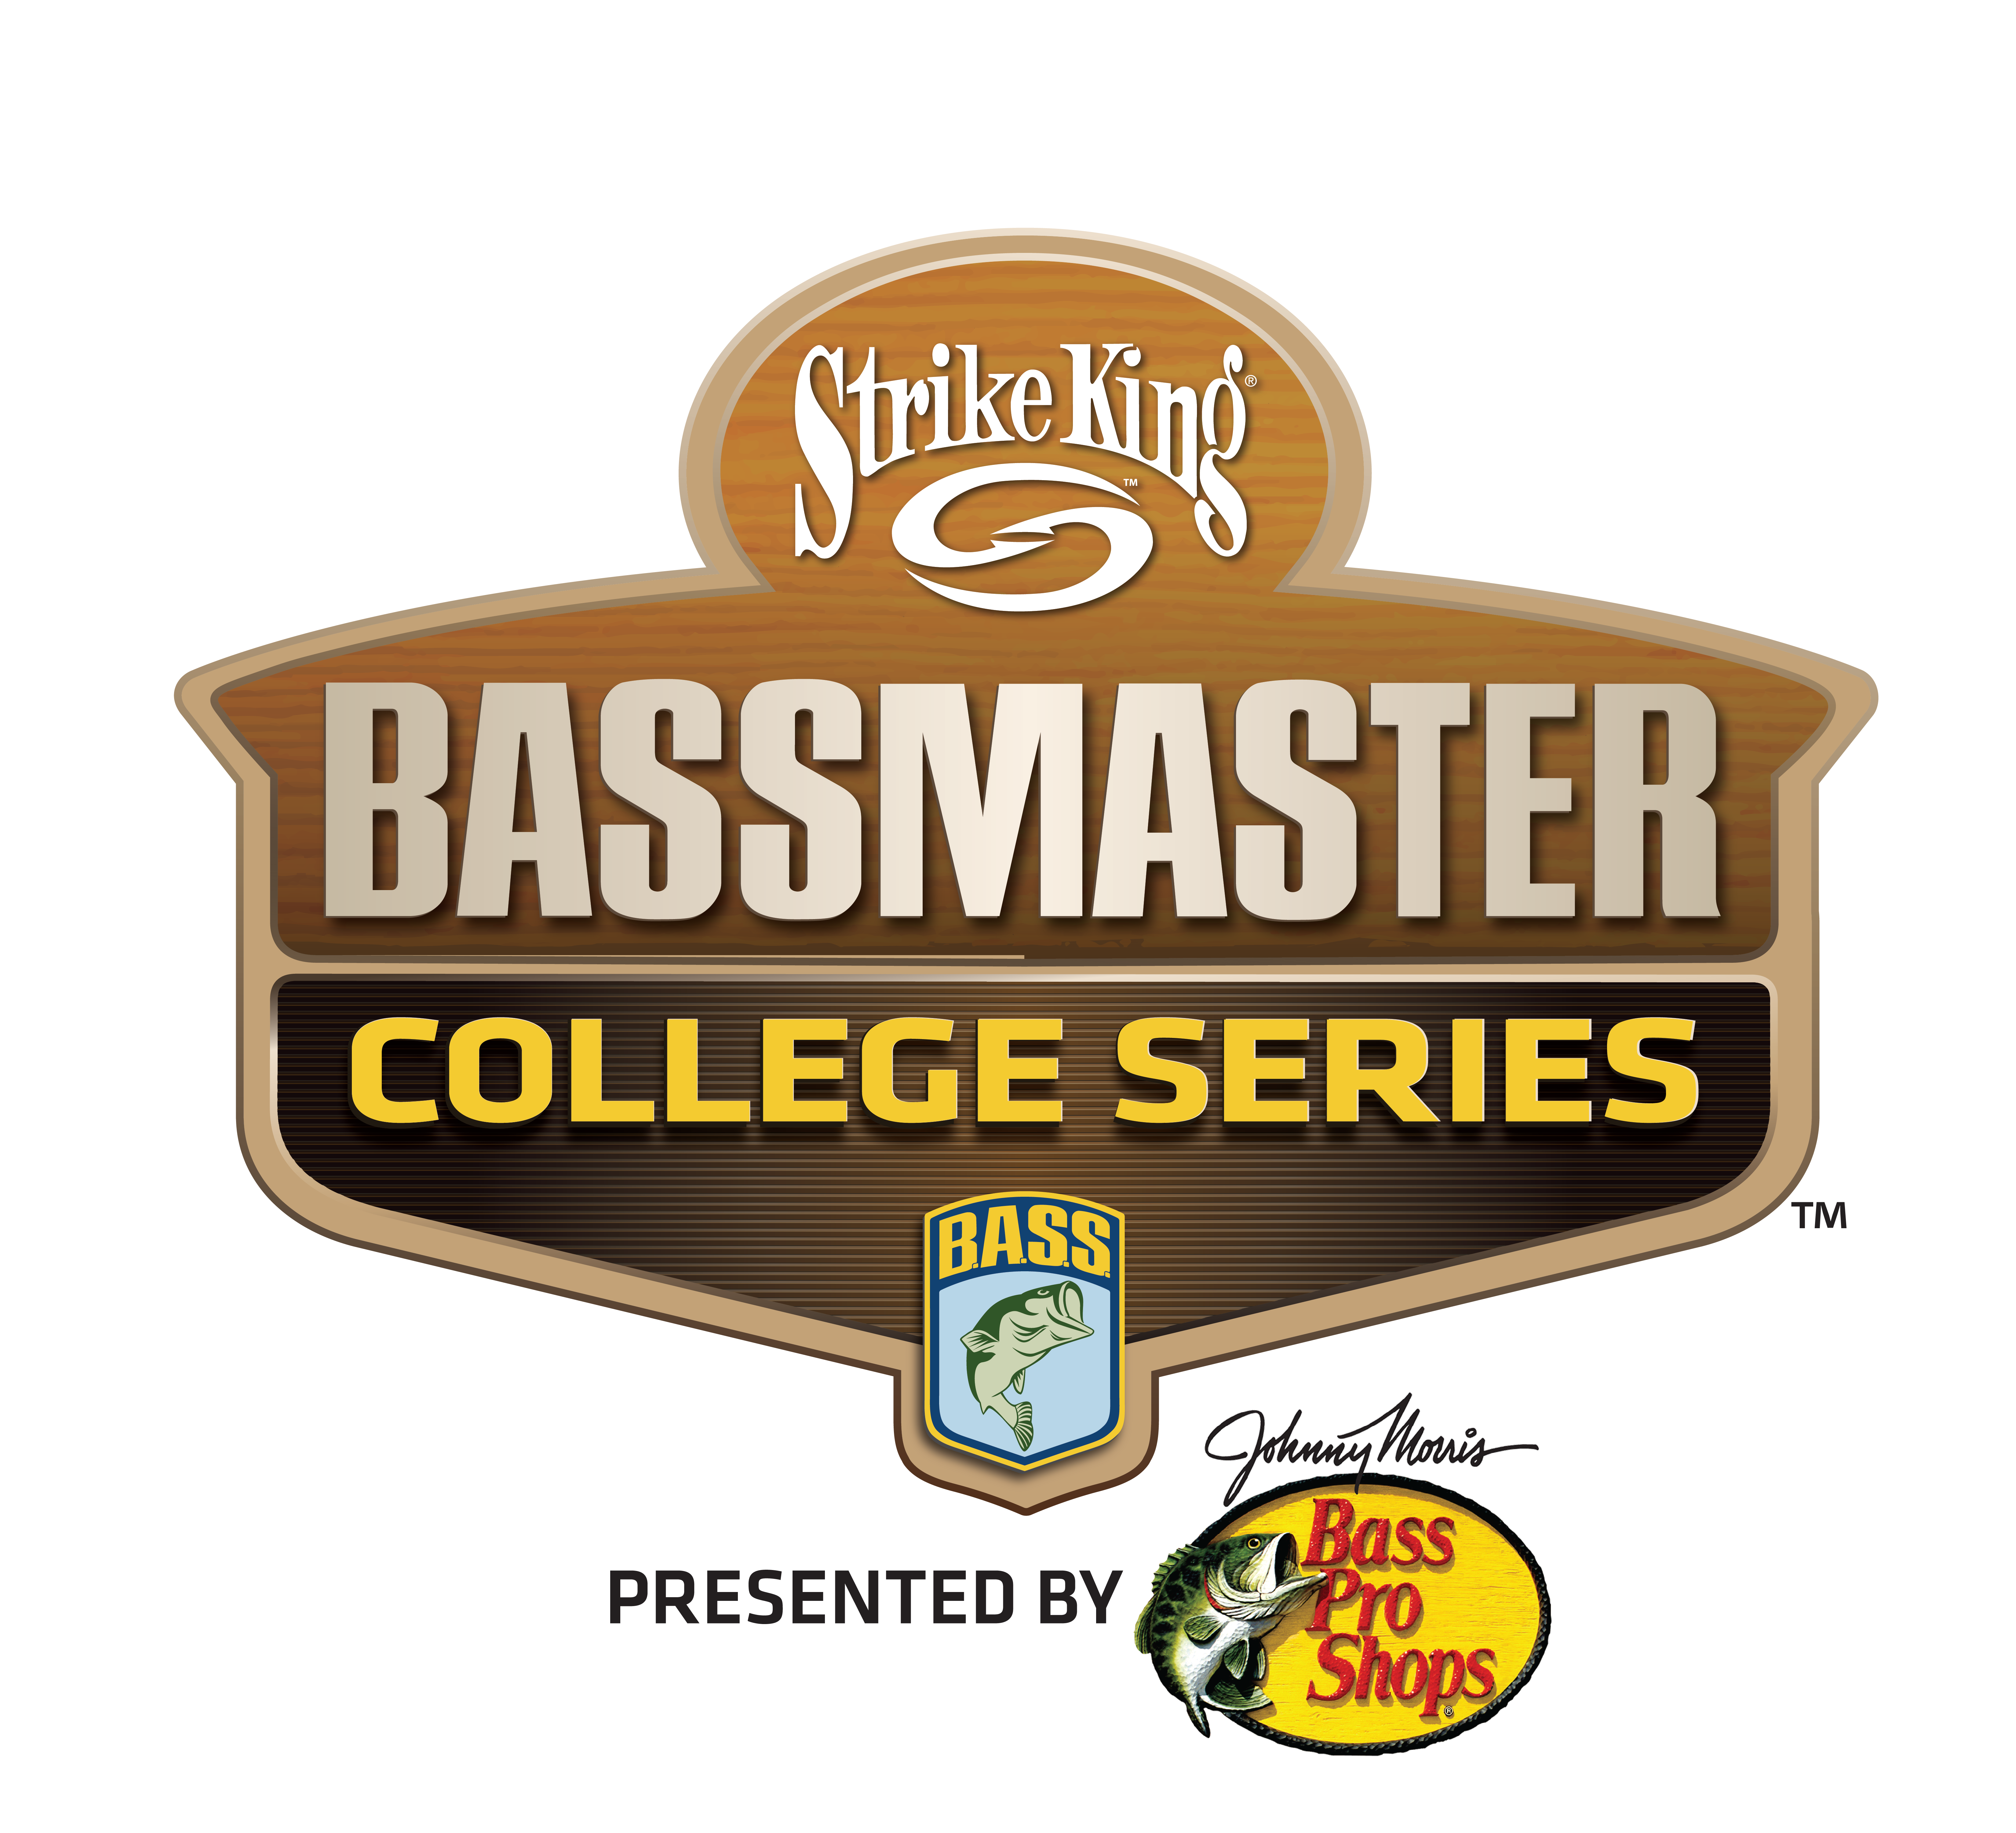 Fishing fast puts Stephen F. Austin's Aebi and Burns in the lead at Bassmaster  College Series event on Douglas